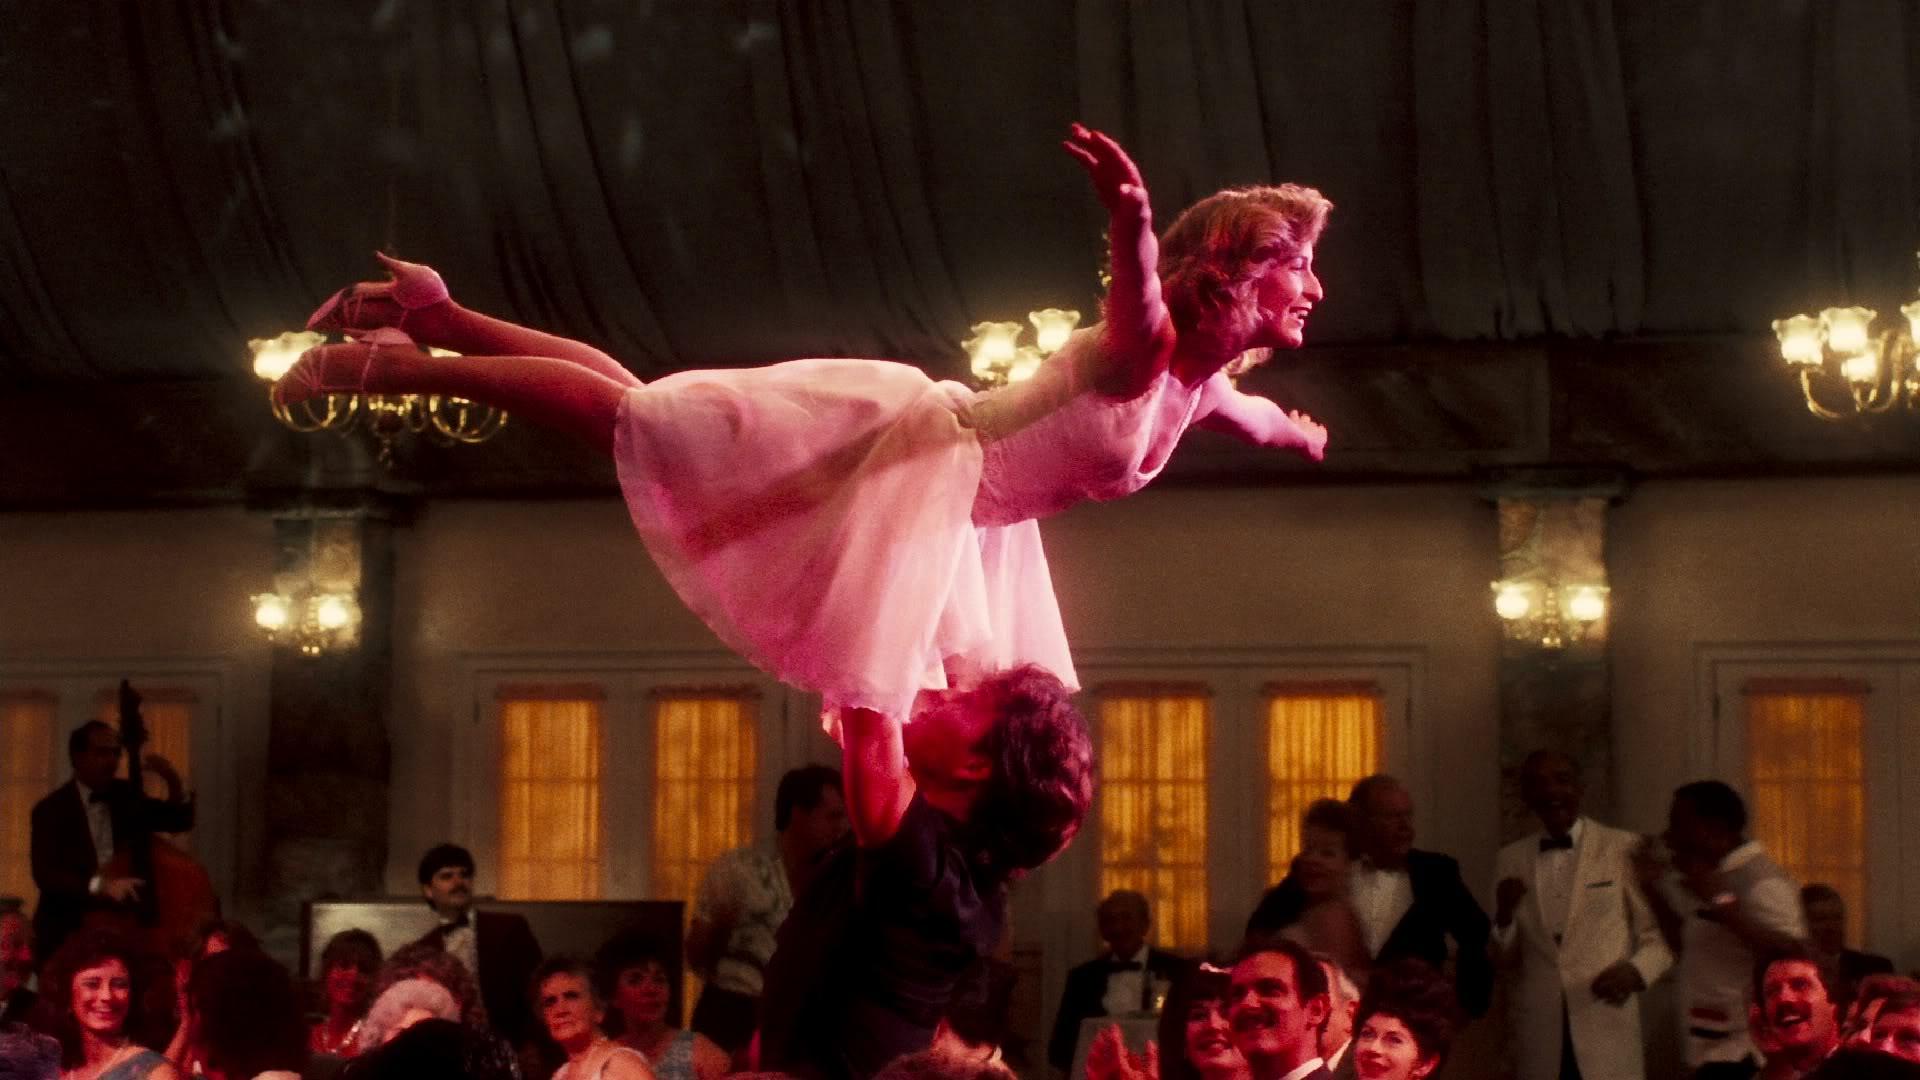 Dirty Dancing Re Visited: 1987 Film Adapted For Stage (Video)